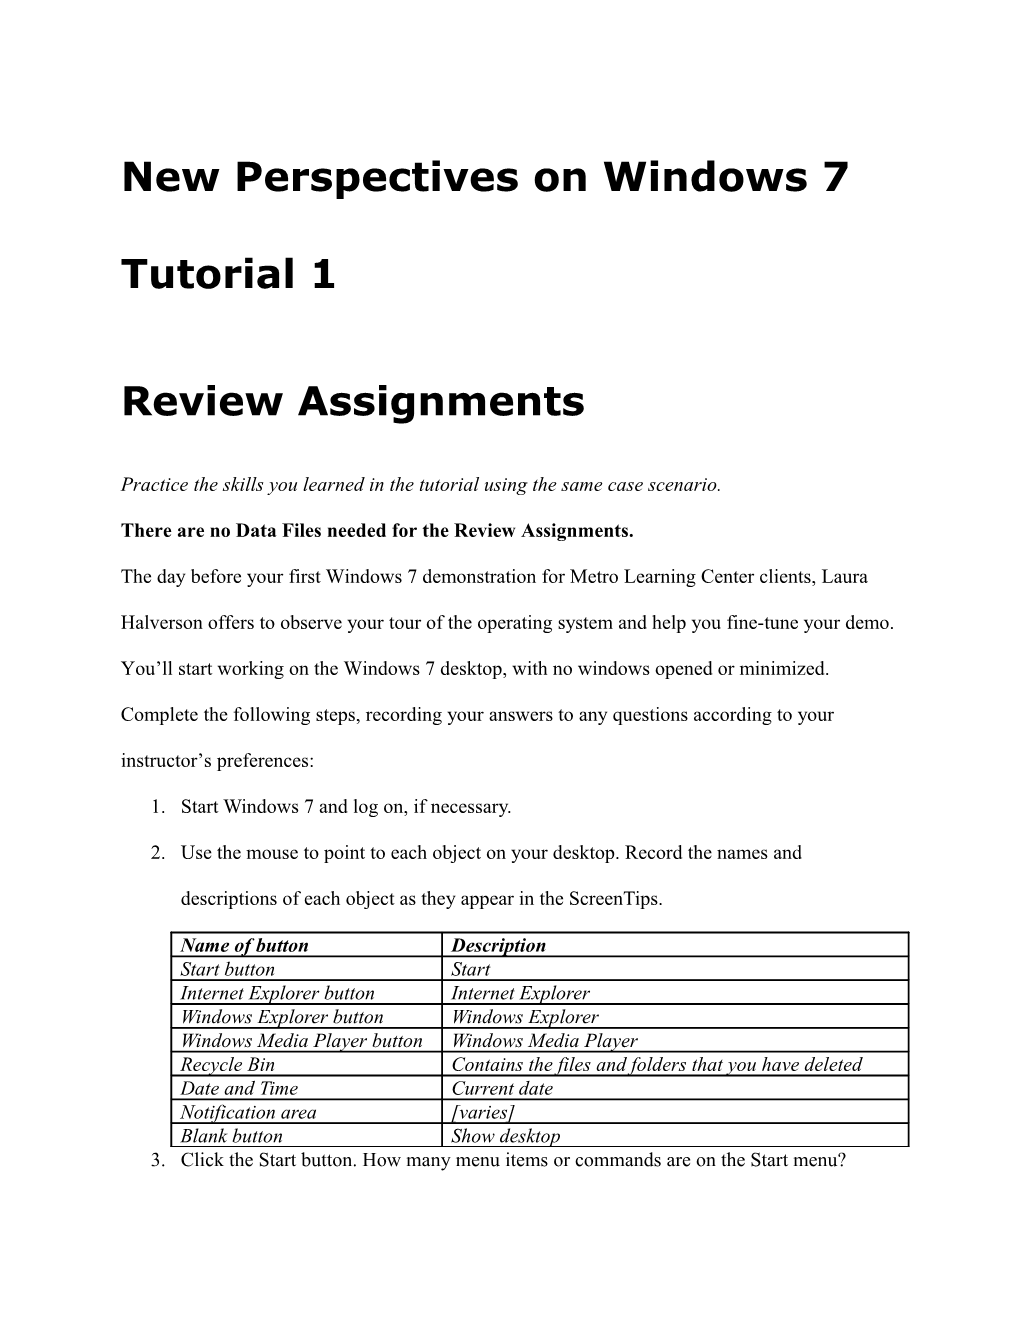 New Perspectives on Windows 7 Tutorial 1